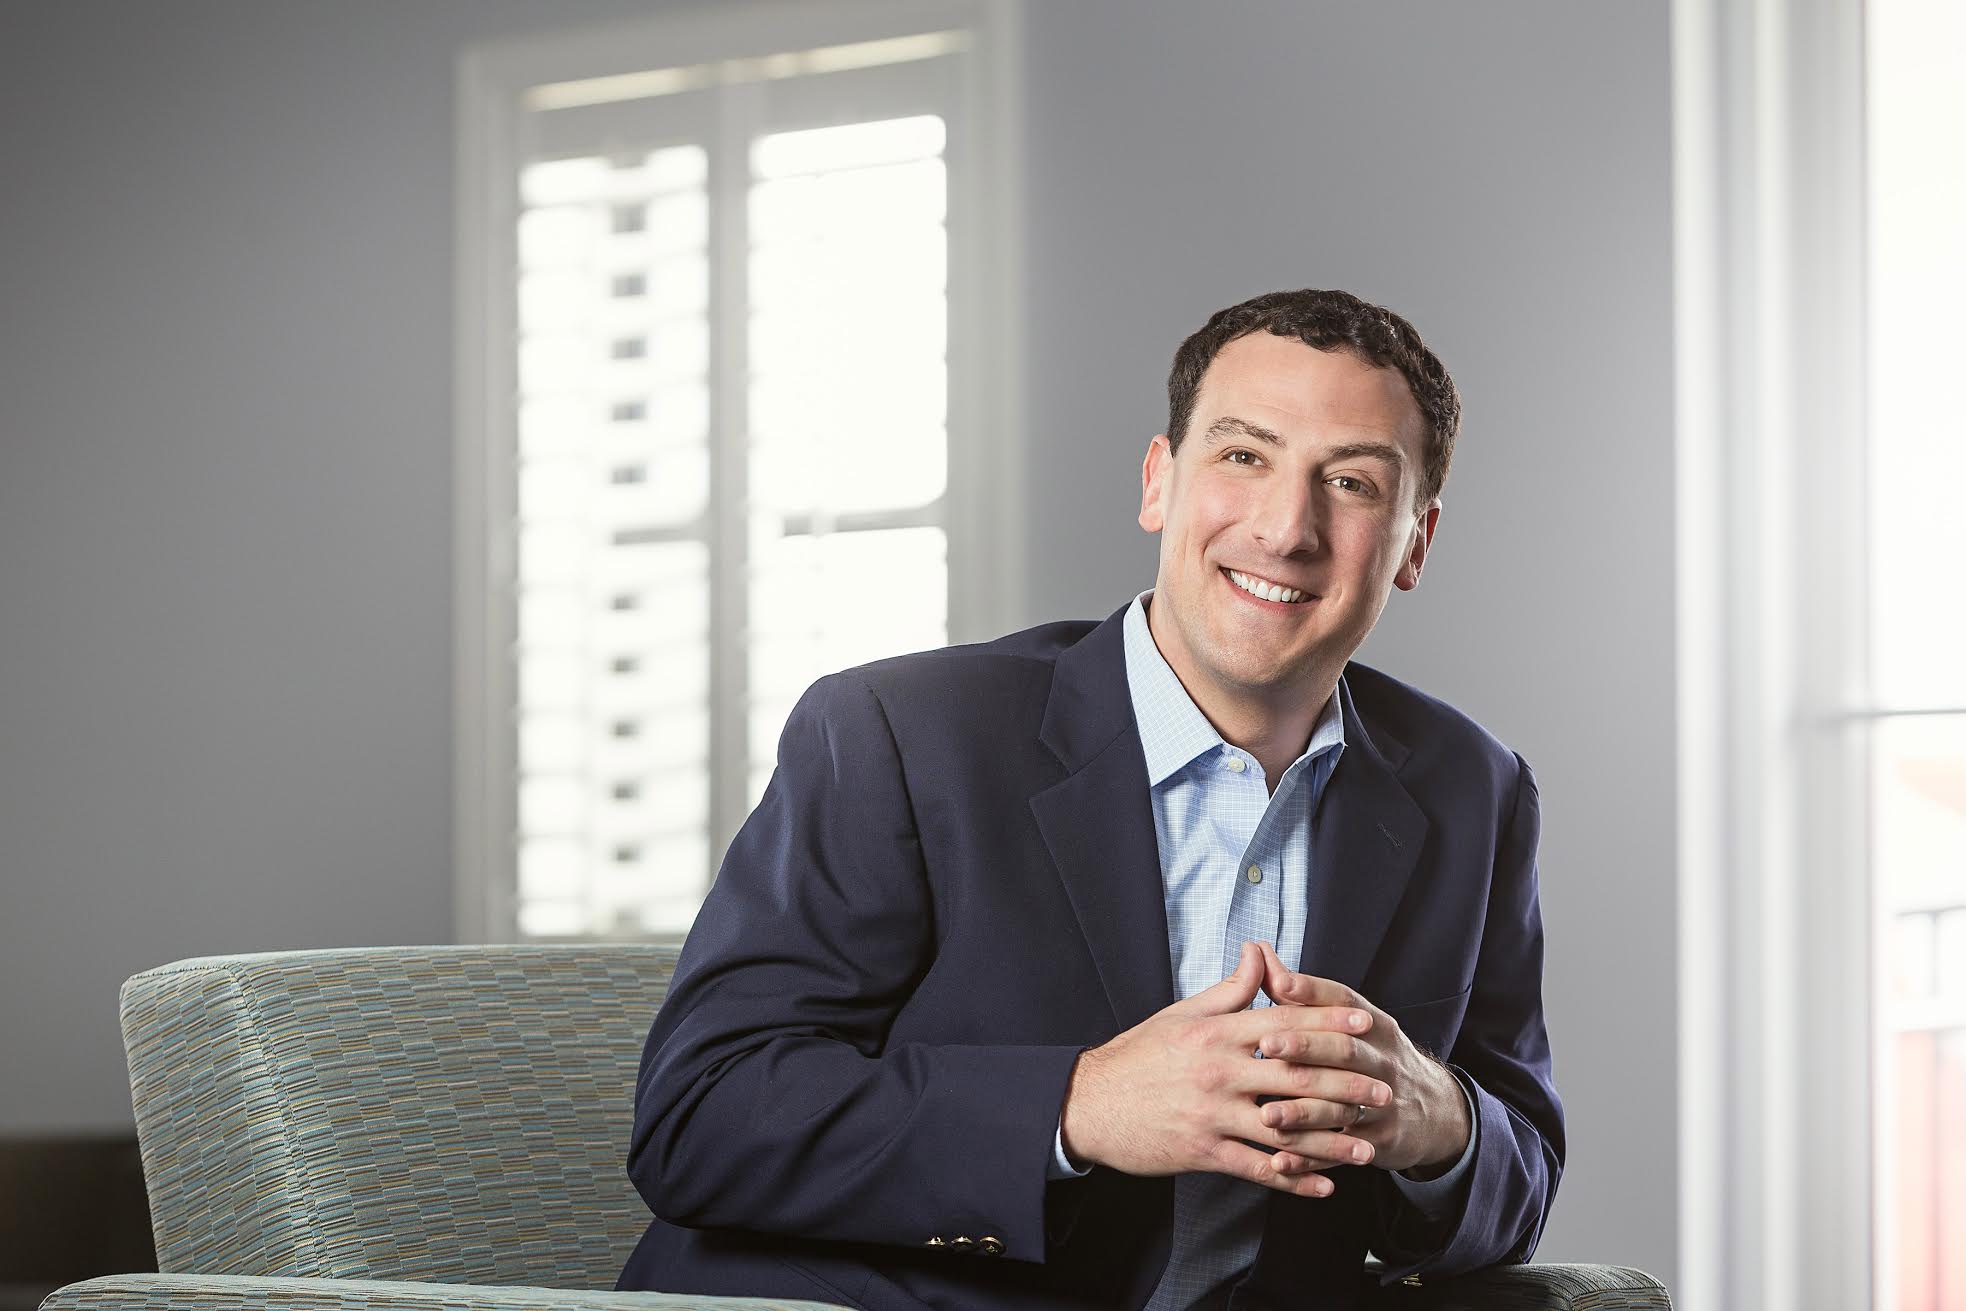 Ep. 19: Actor, Lawyer, CEO and more: How Isaac Lidsky created his reality by living Eyes Wide Open